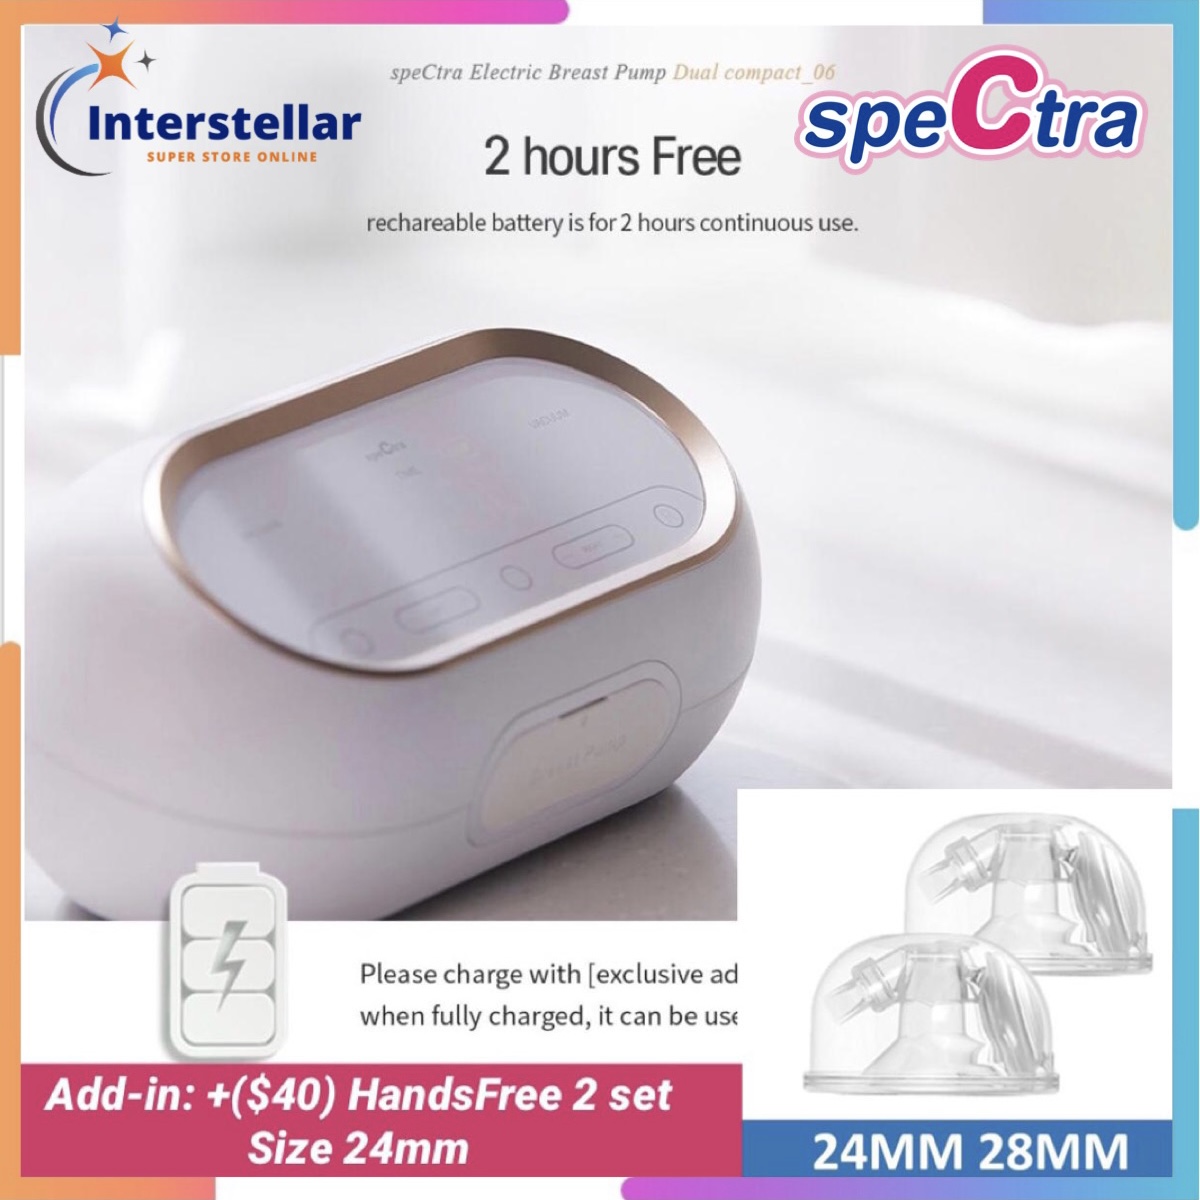 Transform Your Spectra S1 into a Hands-Free Portable Pump Now!